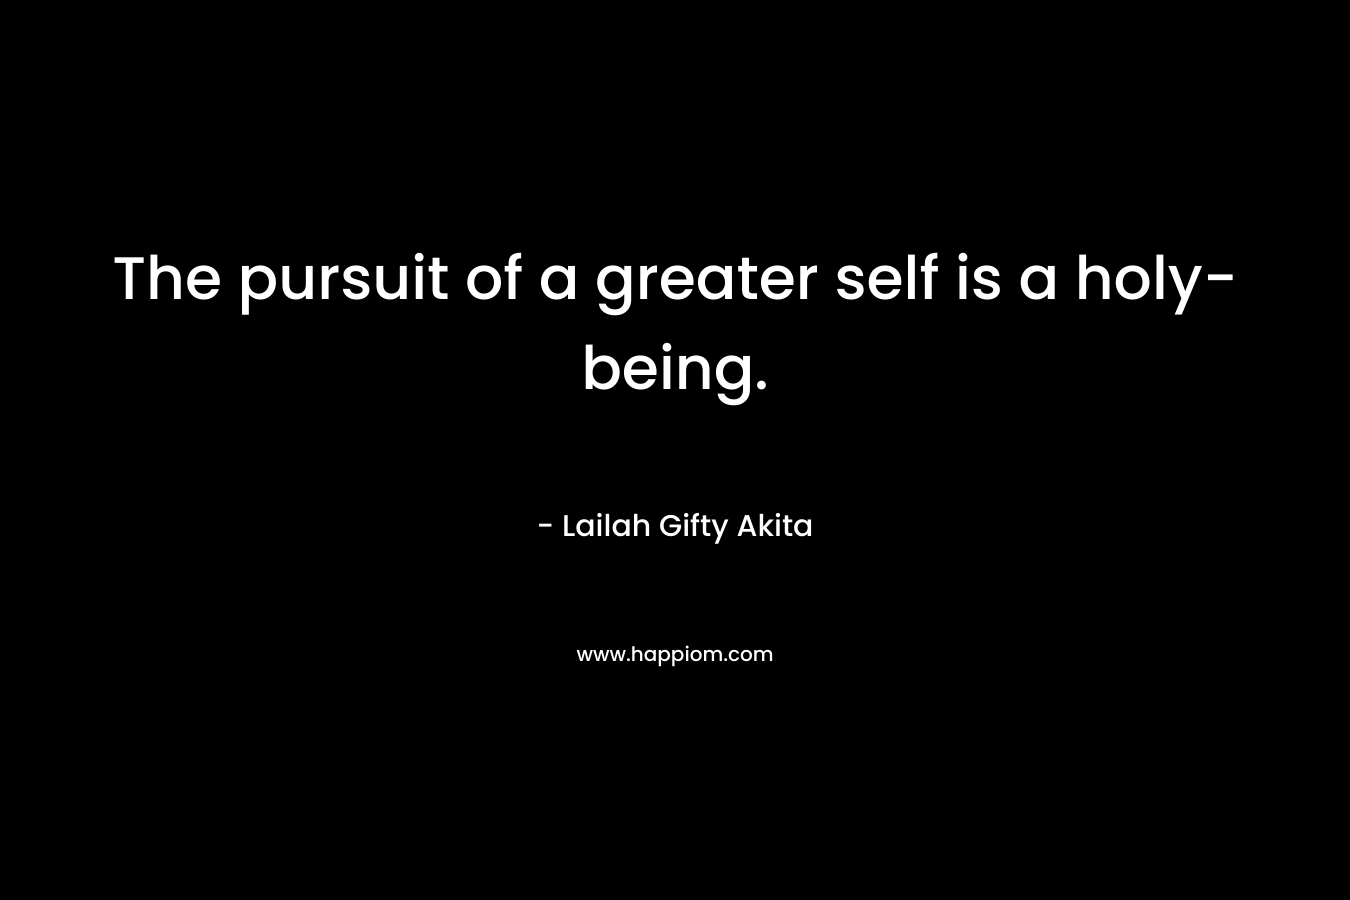 The pursuit of a greater self is a holy-being.